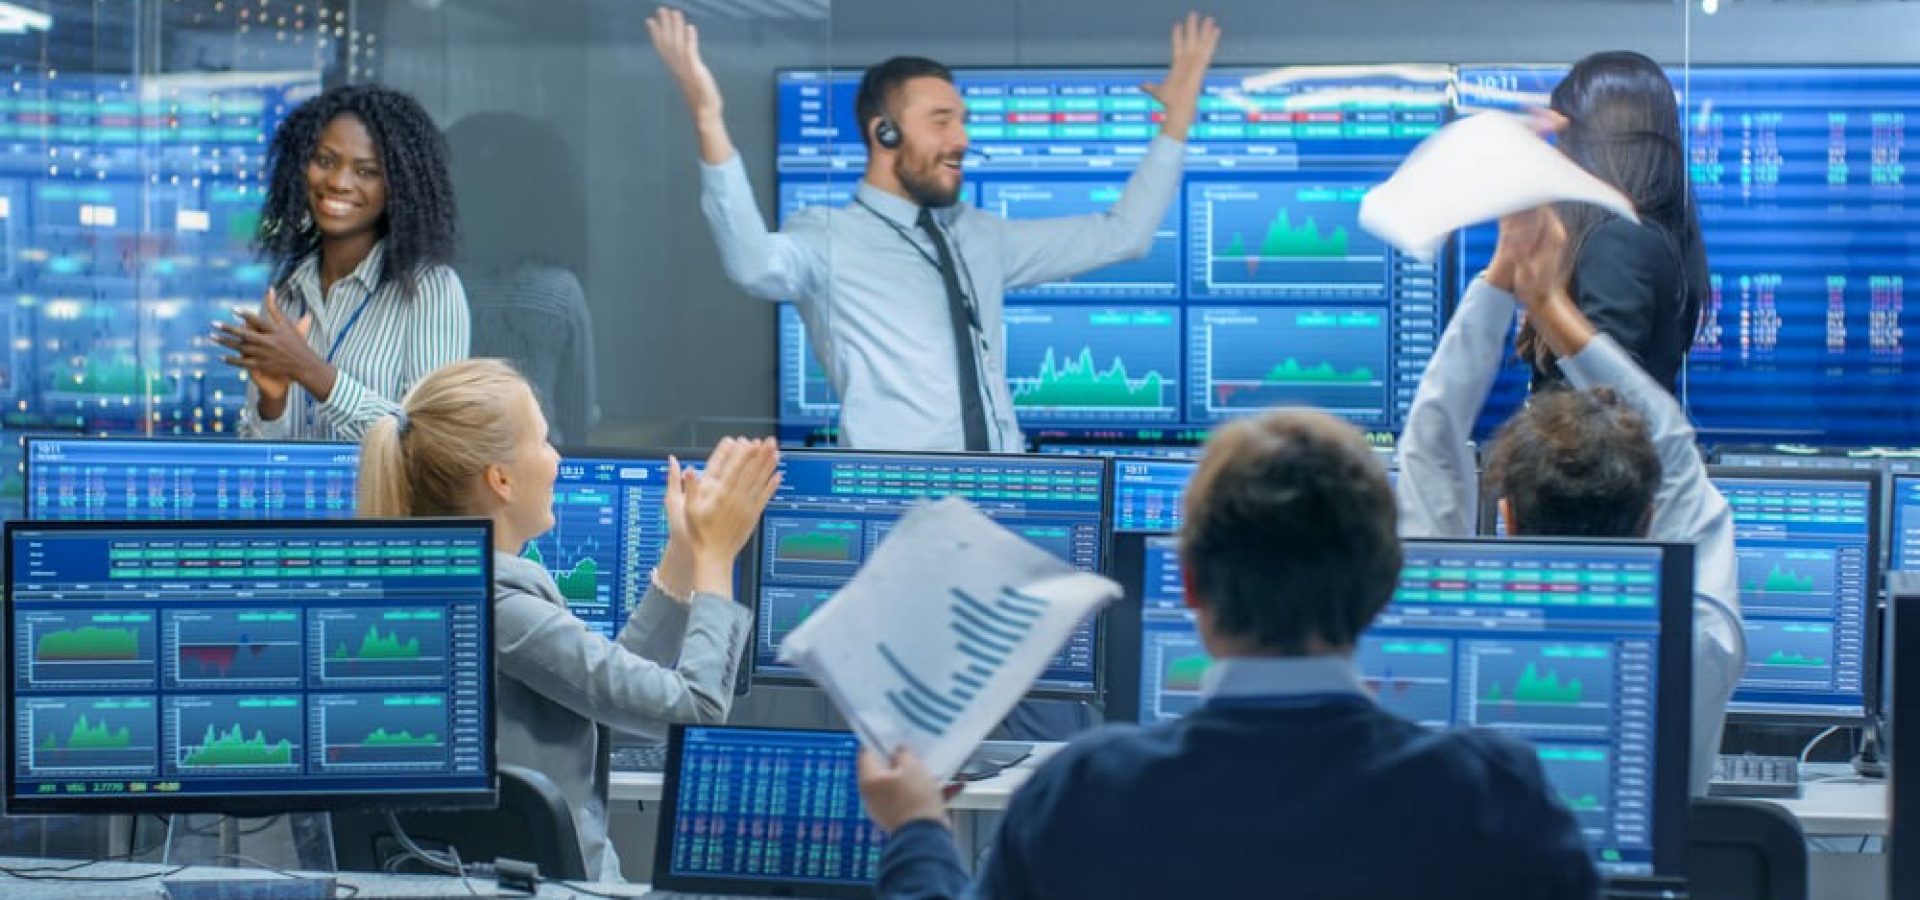 day traders in front of computers and terminals for trading